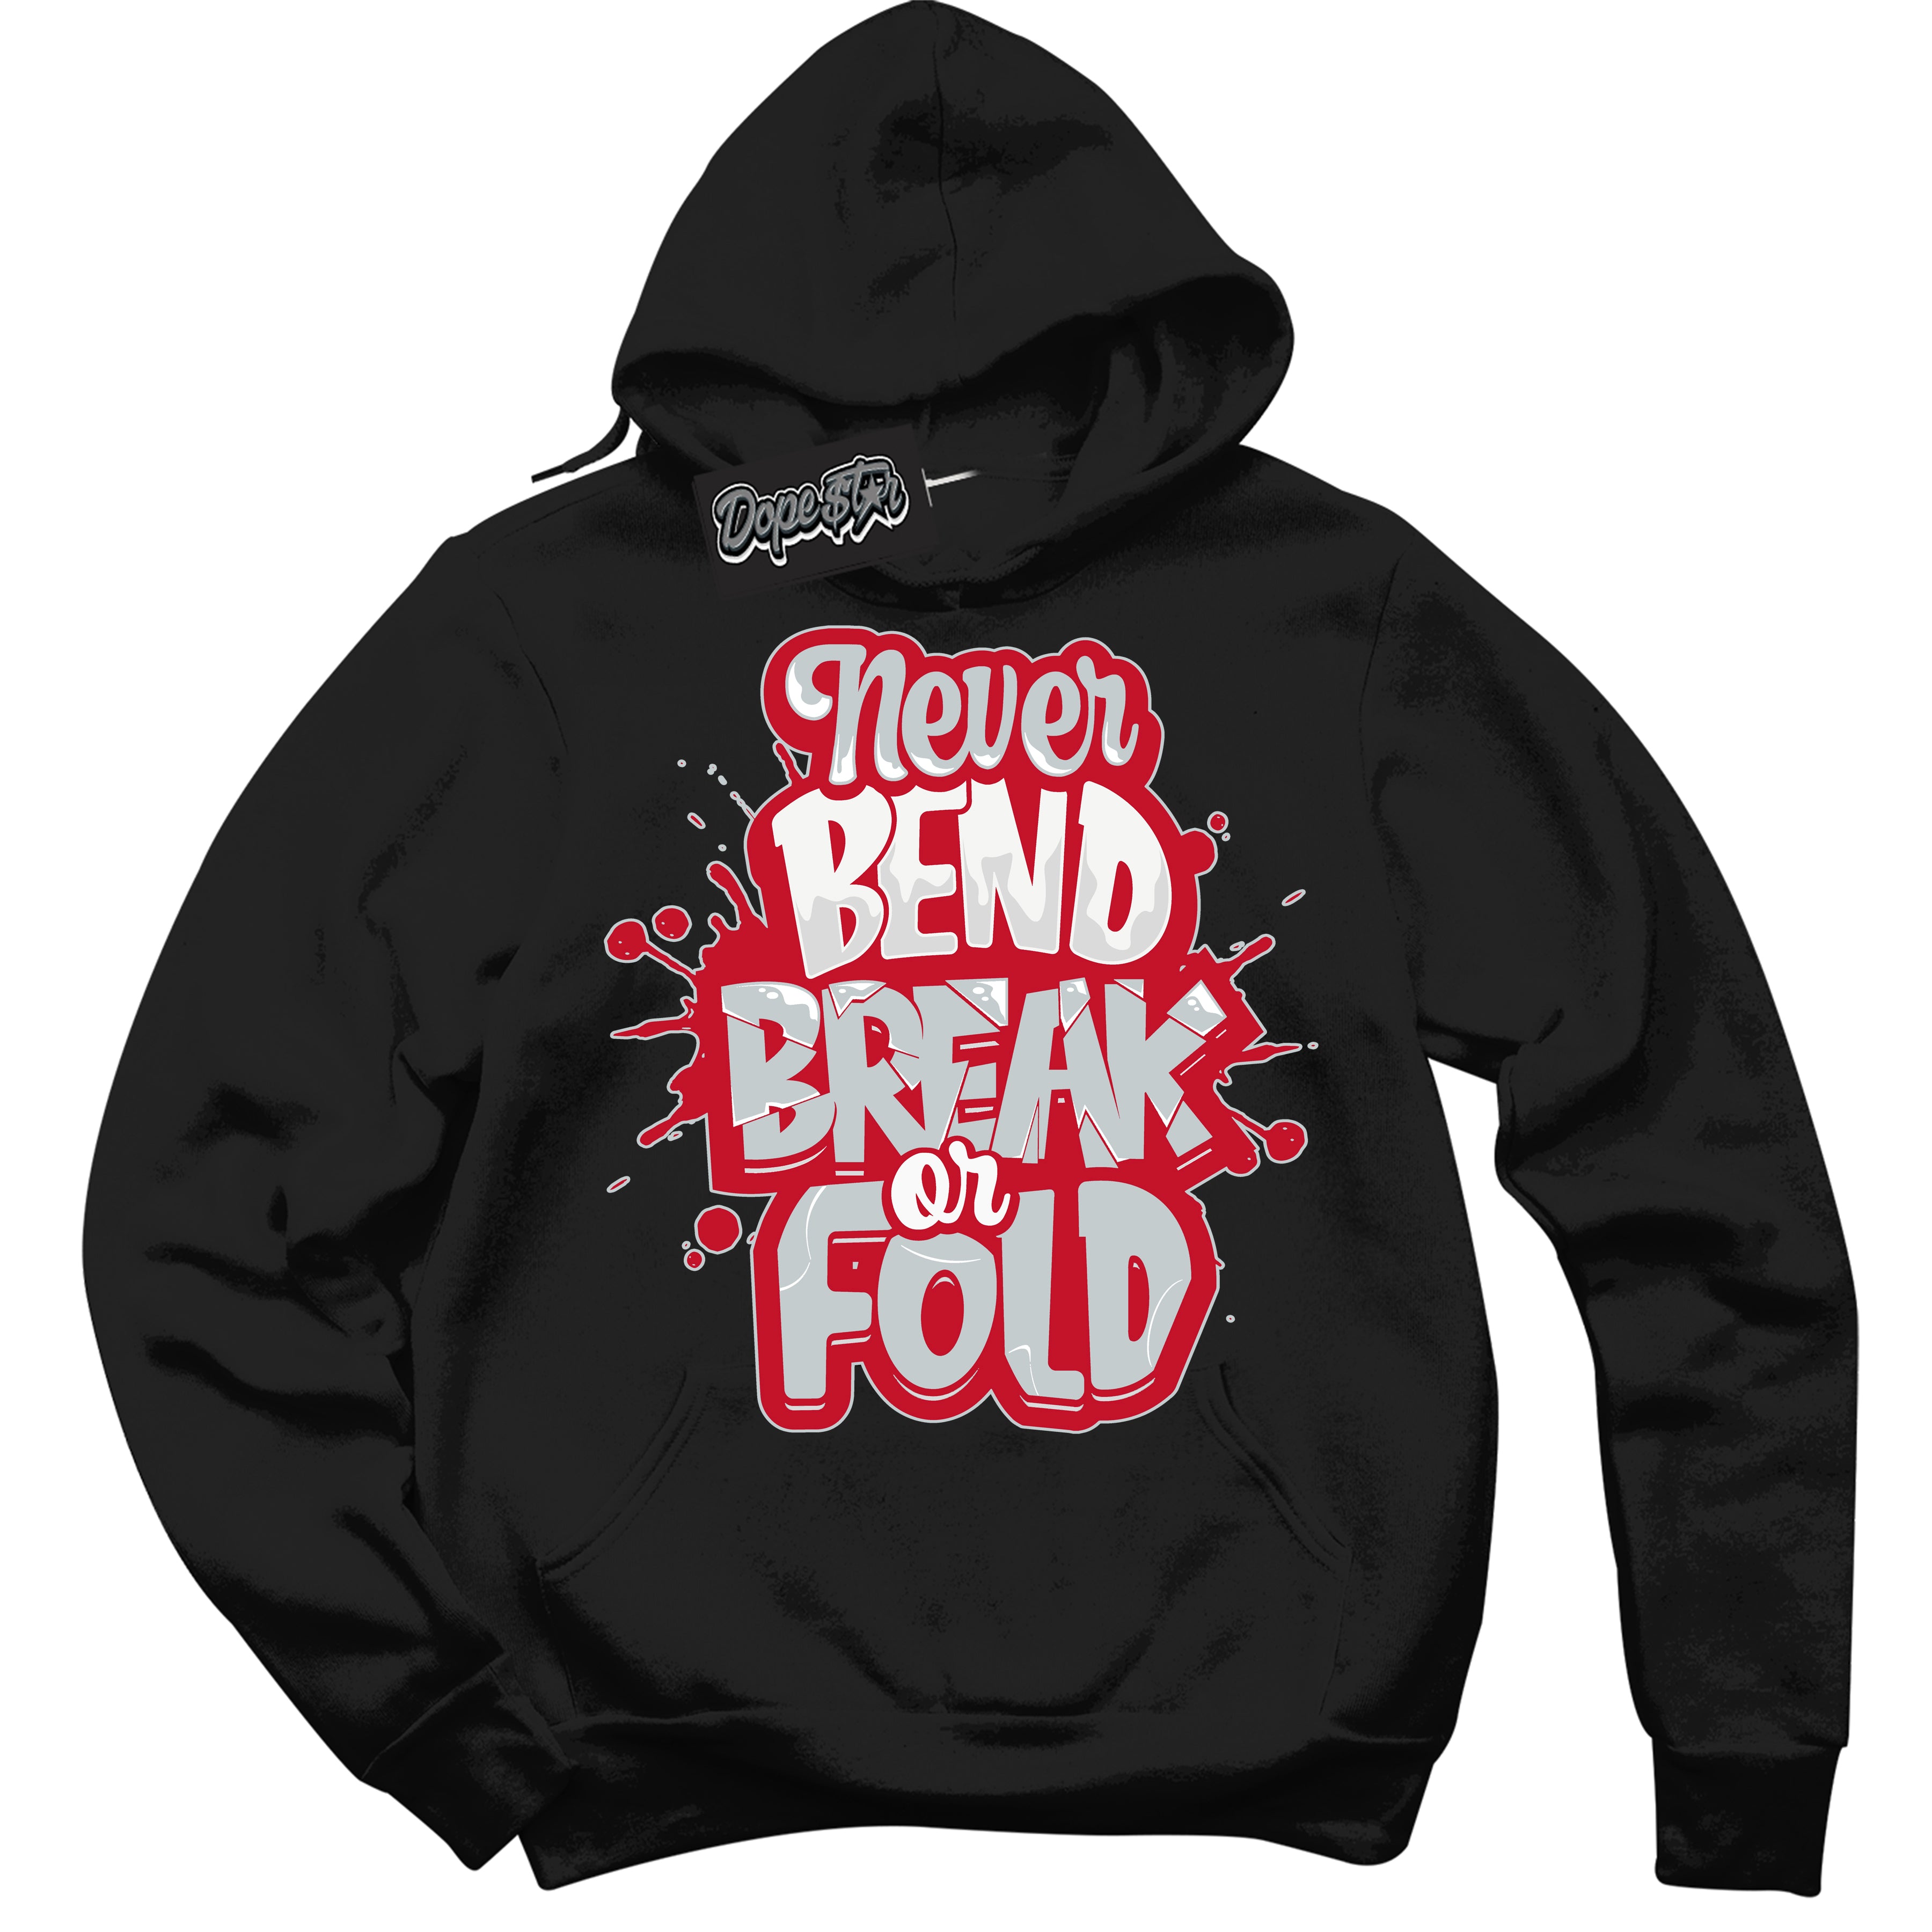 Cool Black Hoodie with “ Never Bend Break Or Fold ”  design that Perfectly Matches  Reverse Ultraman Sneakers.